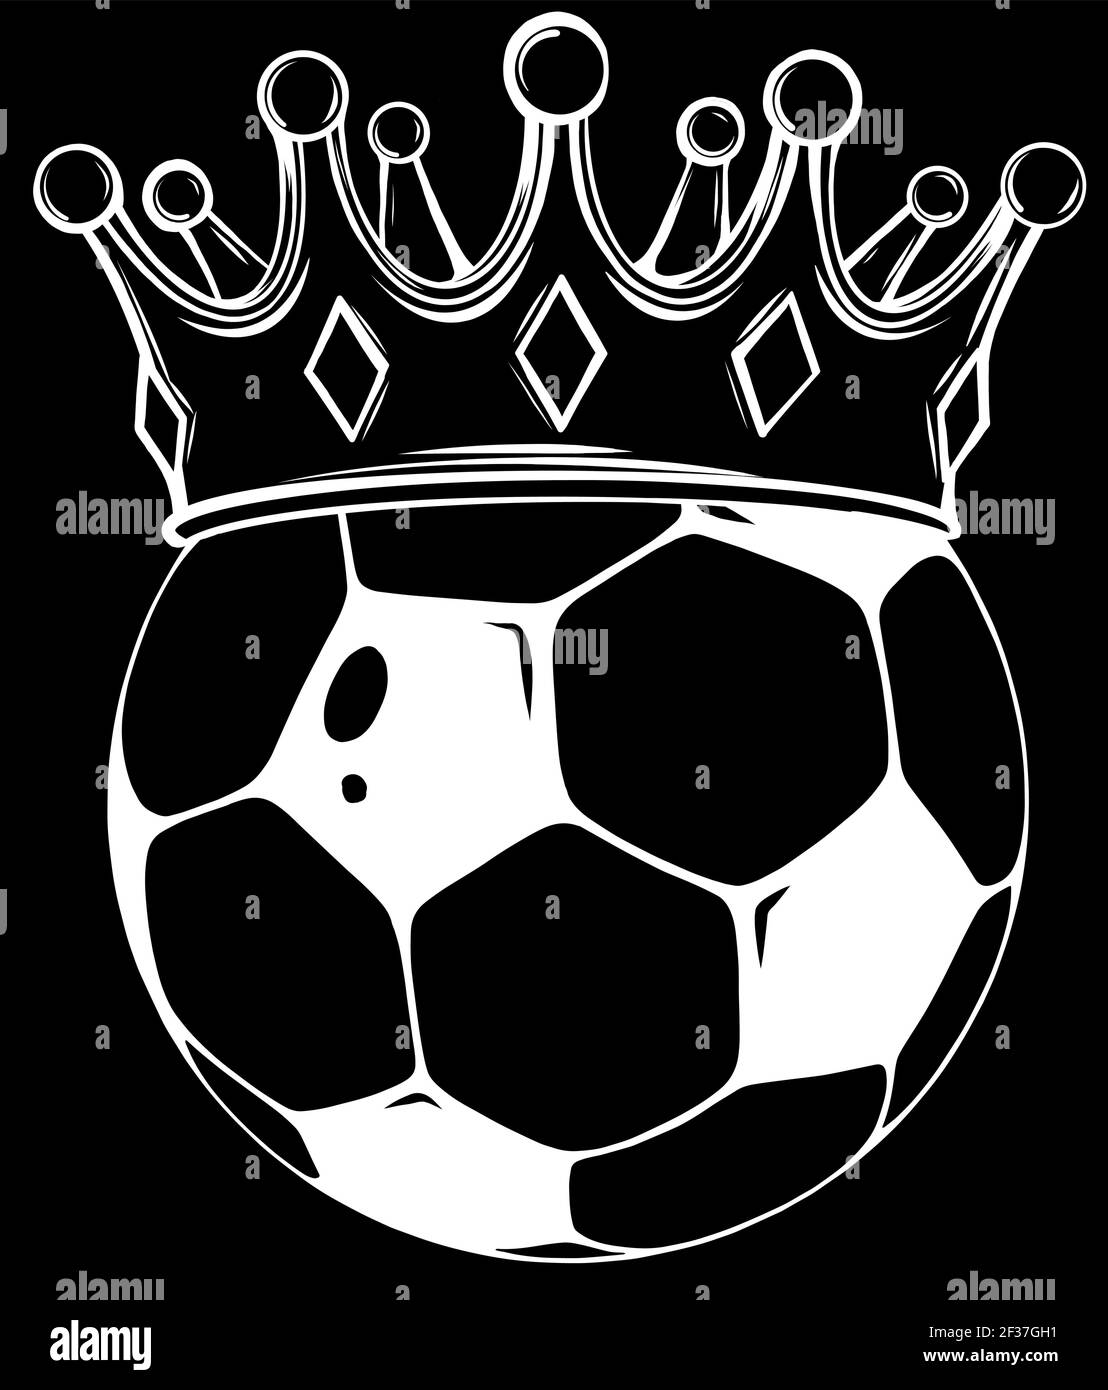 Football ball logo in gold crown, silhouette in black background vector illustration Stock Vector